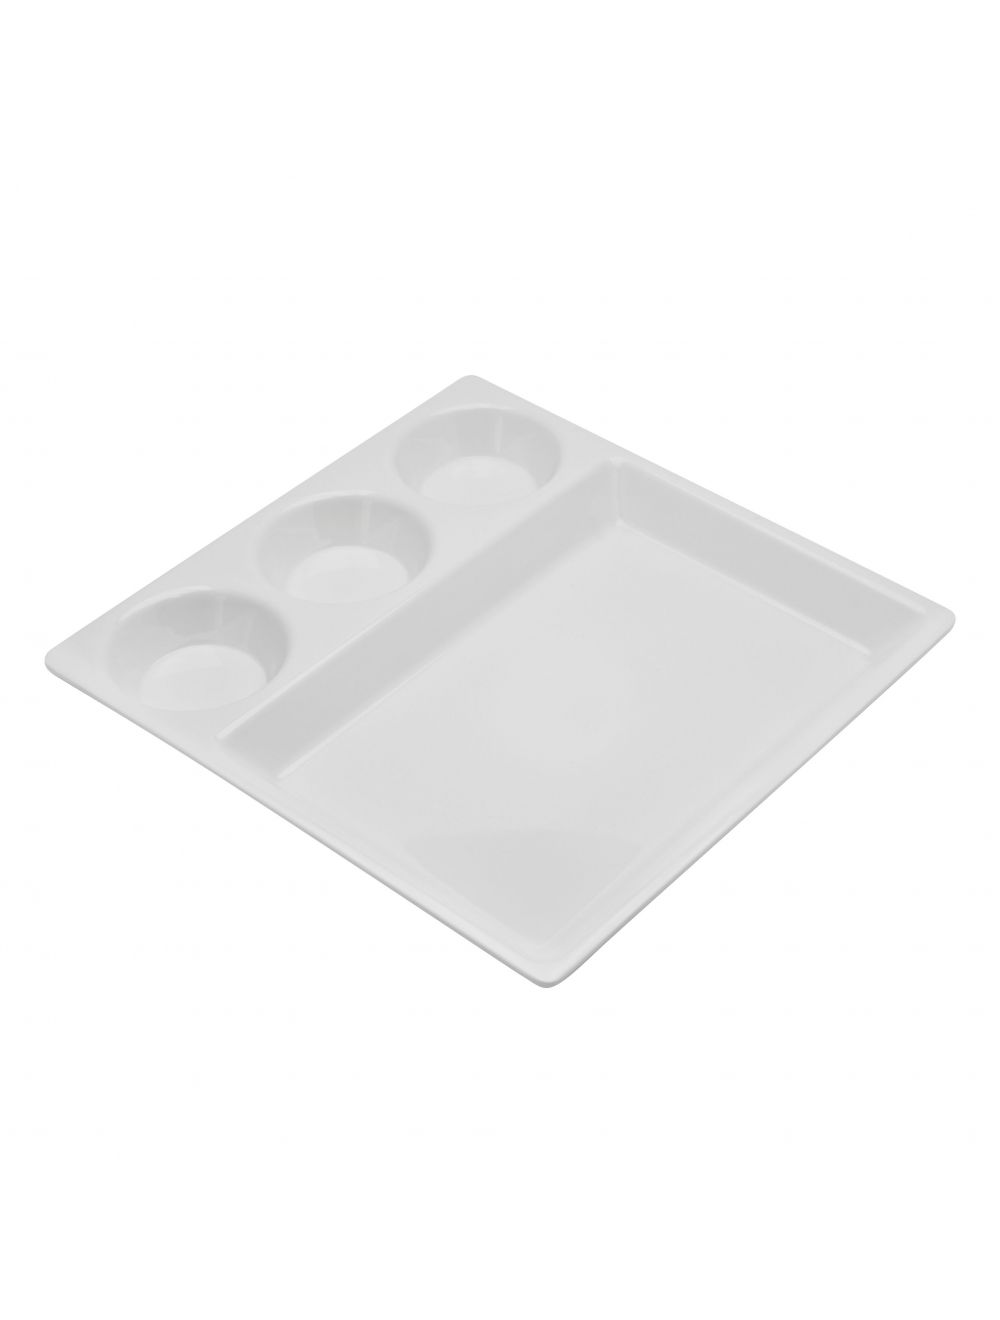 Dinewell Melamine 4 Partition Tray White-DWHP3074W